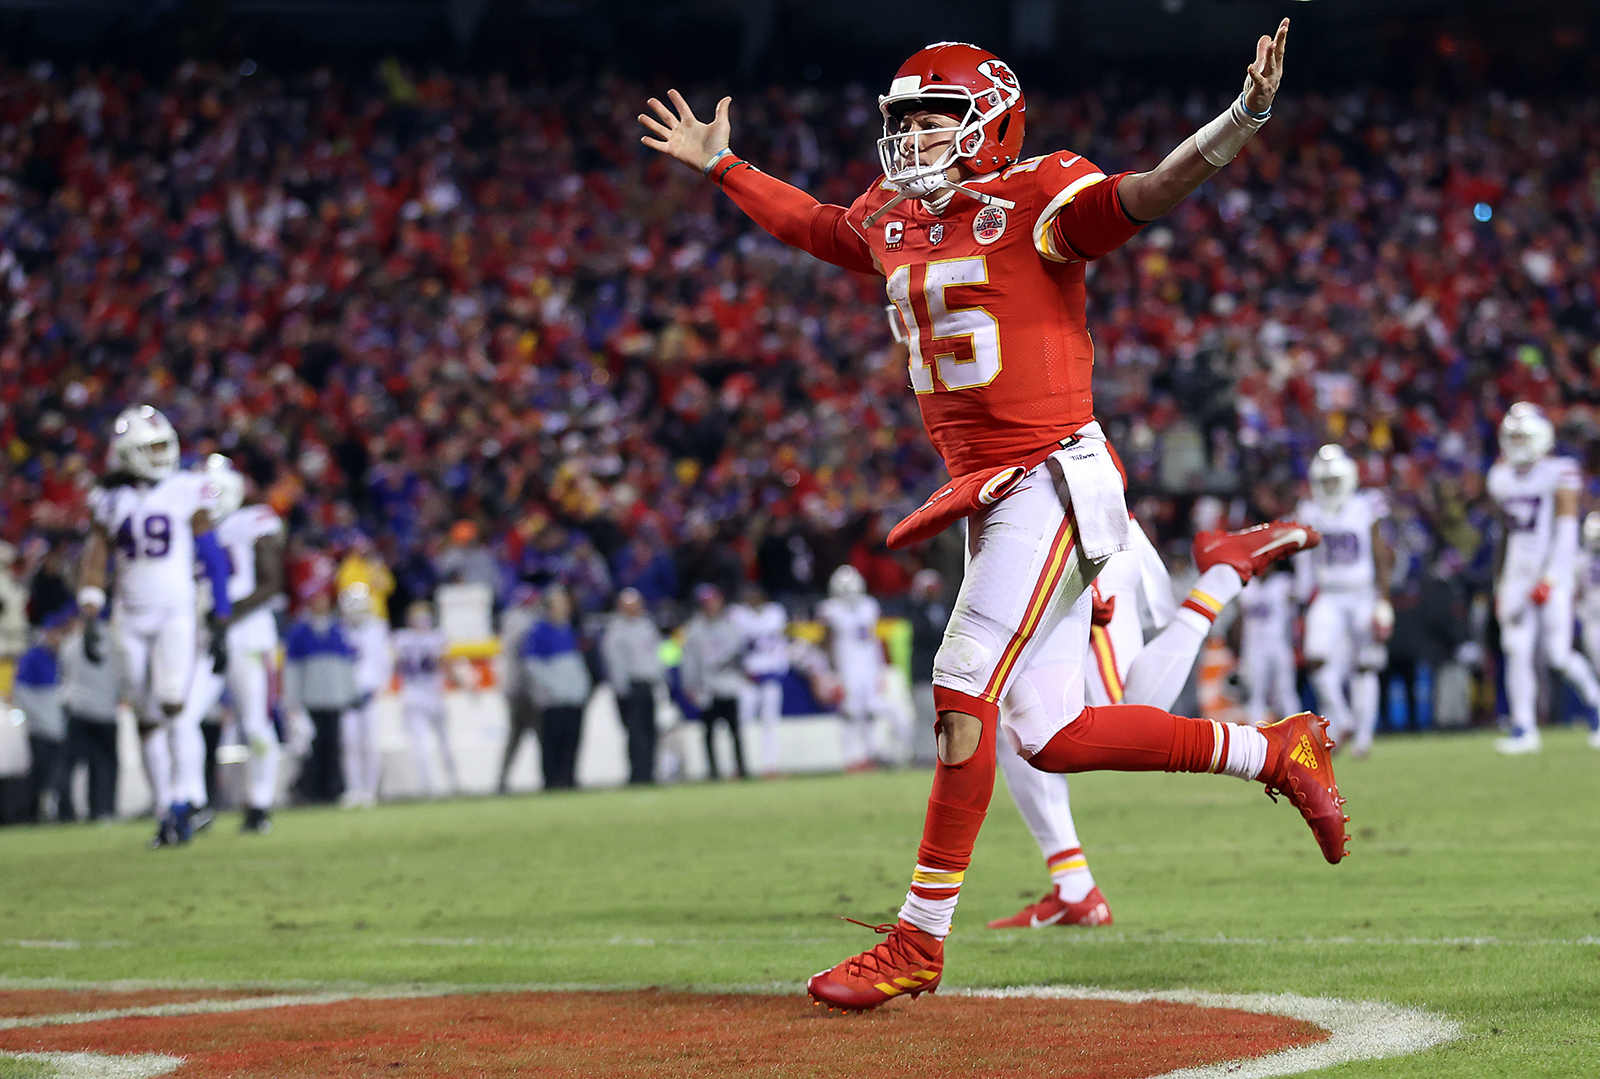 Patrick Mahomes runs toward the end zone while celebrating a touchdown scored by Tyreek Hill during the fourth quarter of the AFC Divisional Playoff game against the Buffalo Bills at Arrowhead Stadium on January 23, in Kansas City, Missouri.